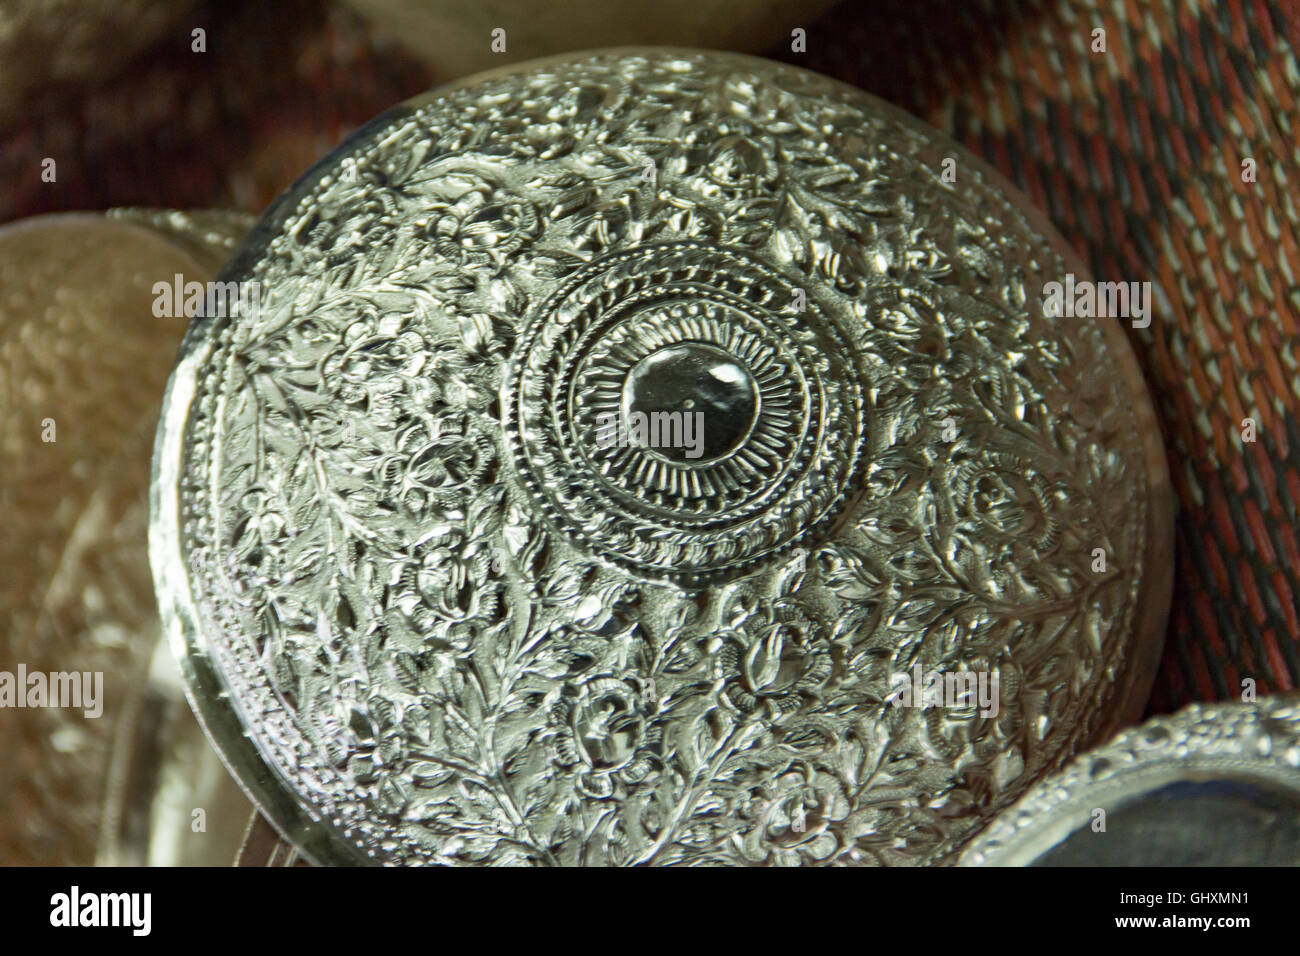 Intricate and delicate carving on hand crafted silver dish at Thailand artisan studio. Stock Photo